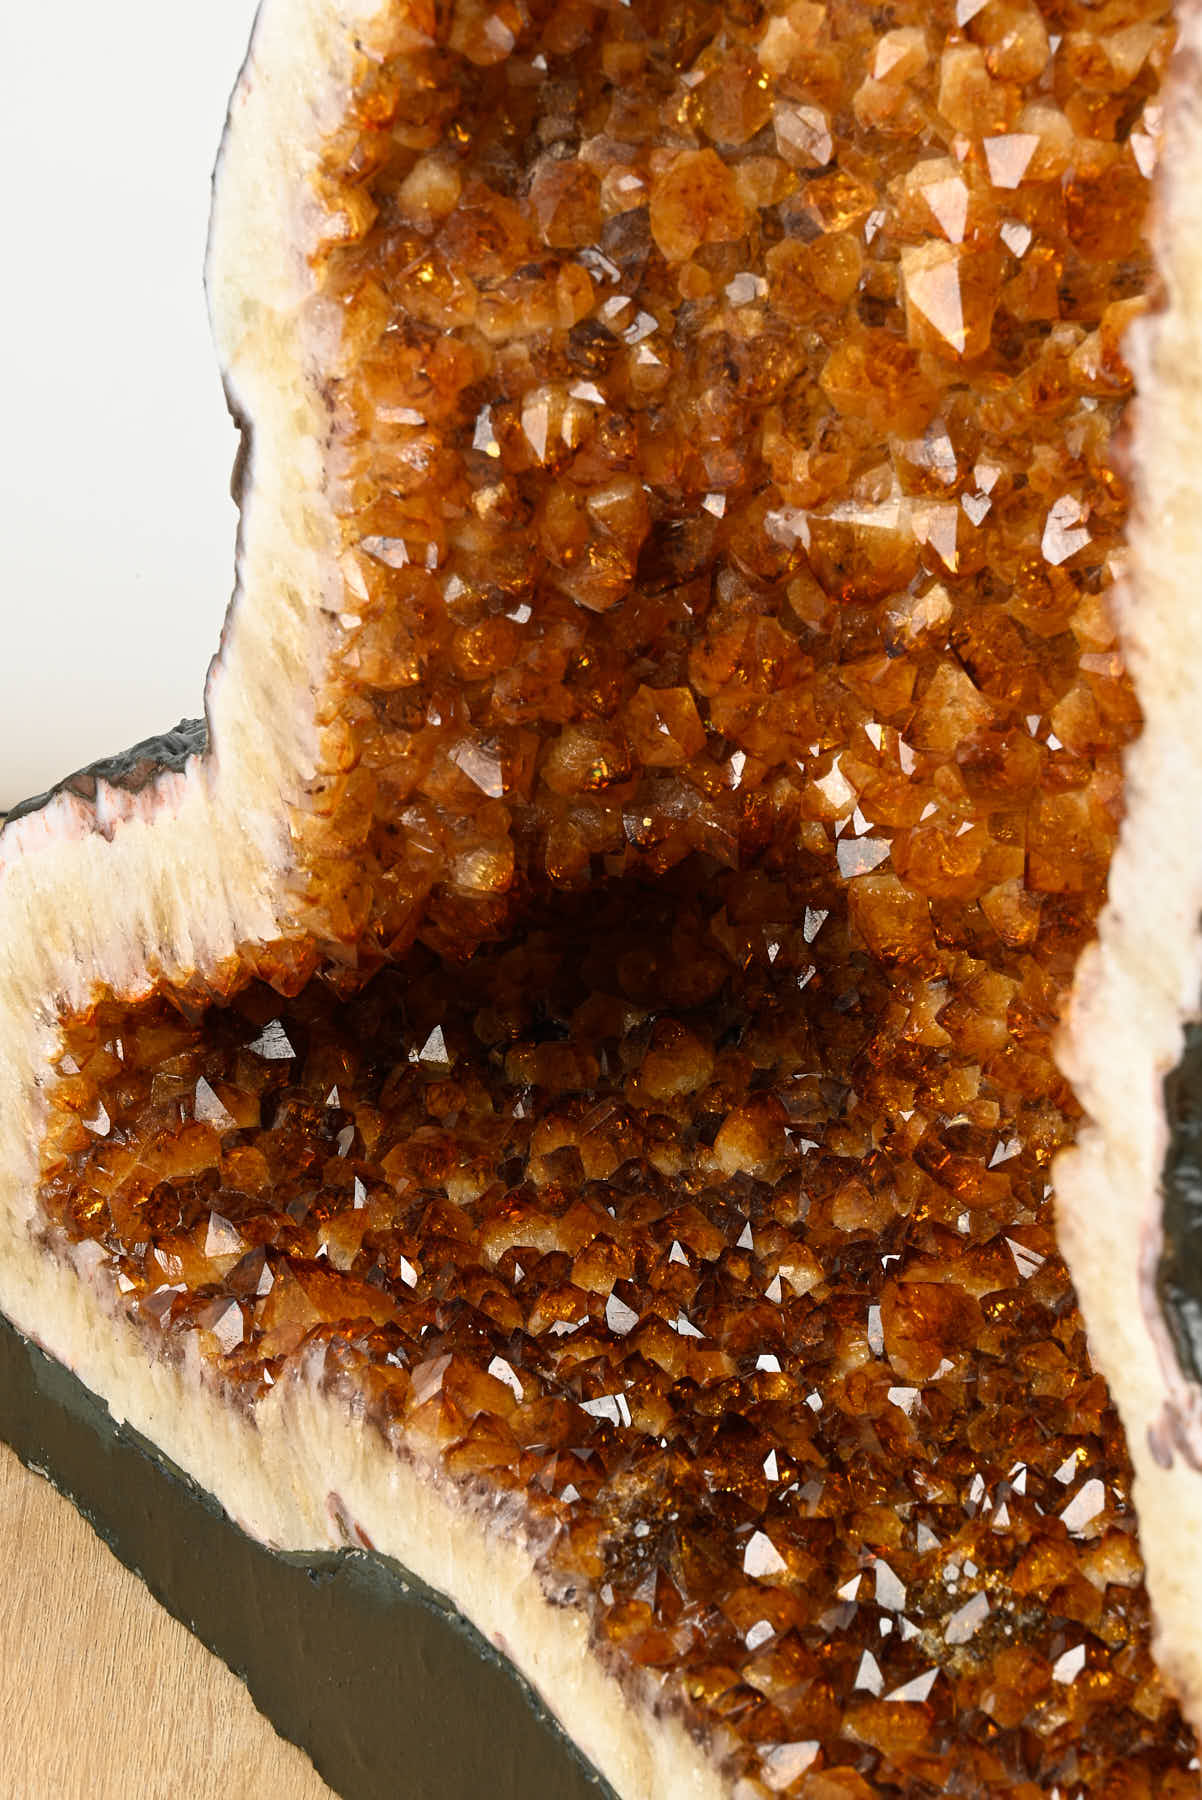 Extra Quality Citrine Cathedral - 89.2kg, 104cm tall - #CACITR-10019